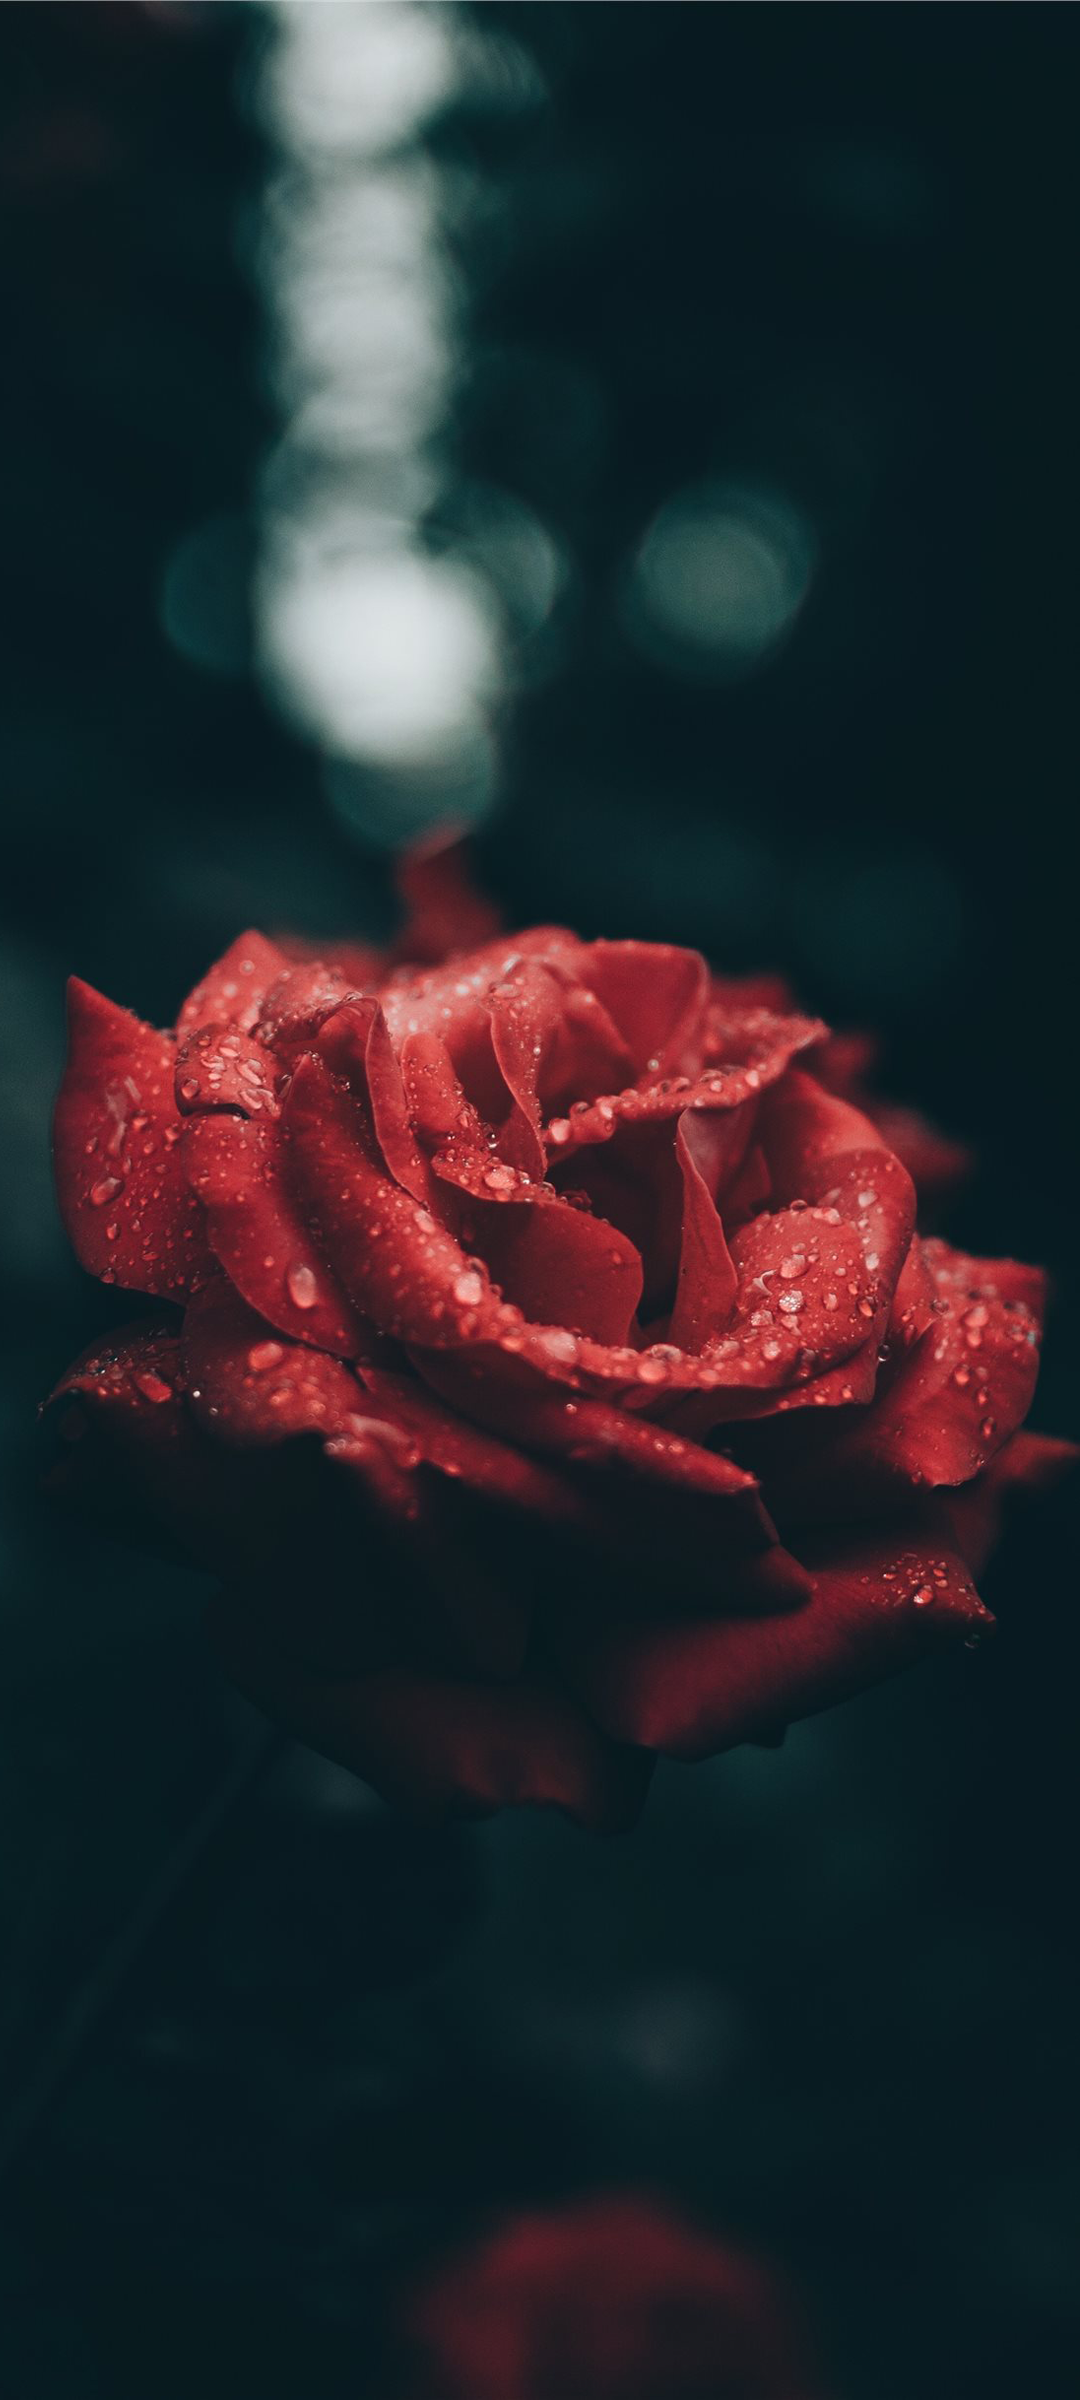 6845 Rose Aesthetic  Android iPhone Desktop HD Backgrounds   Wallpapers 1080p 4k HD Wallpapers Desktop Background  Android   iPhone 1080p 4k 1080x1620 2023